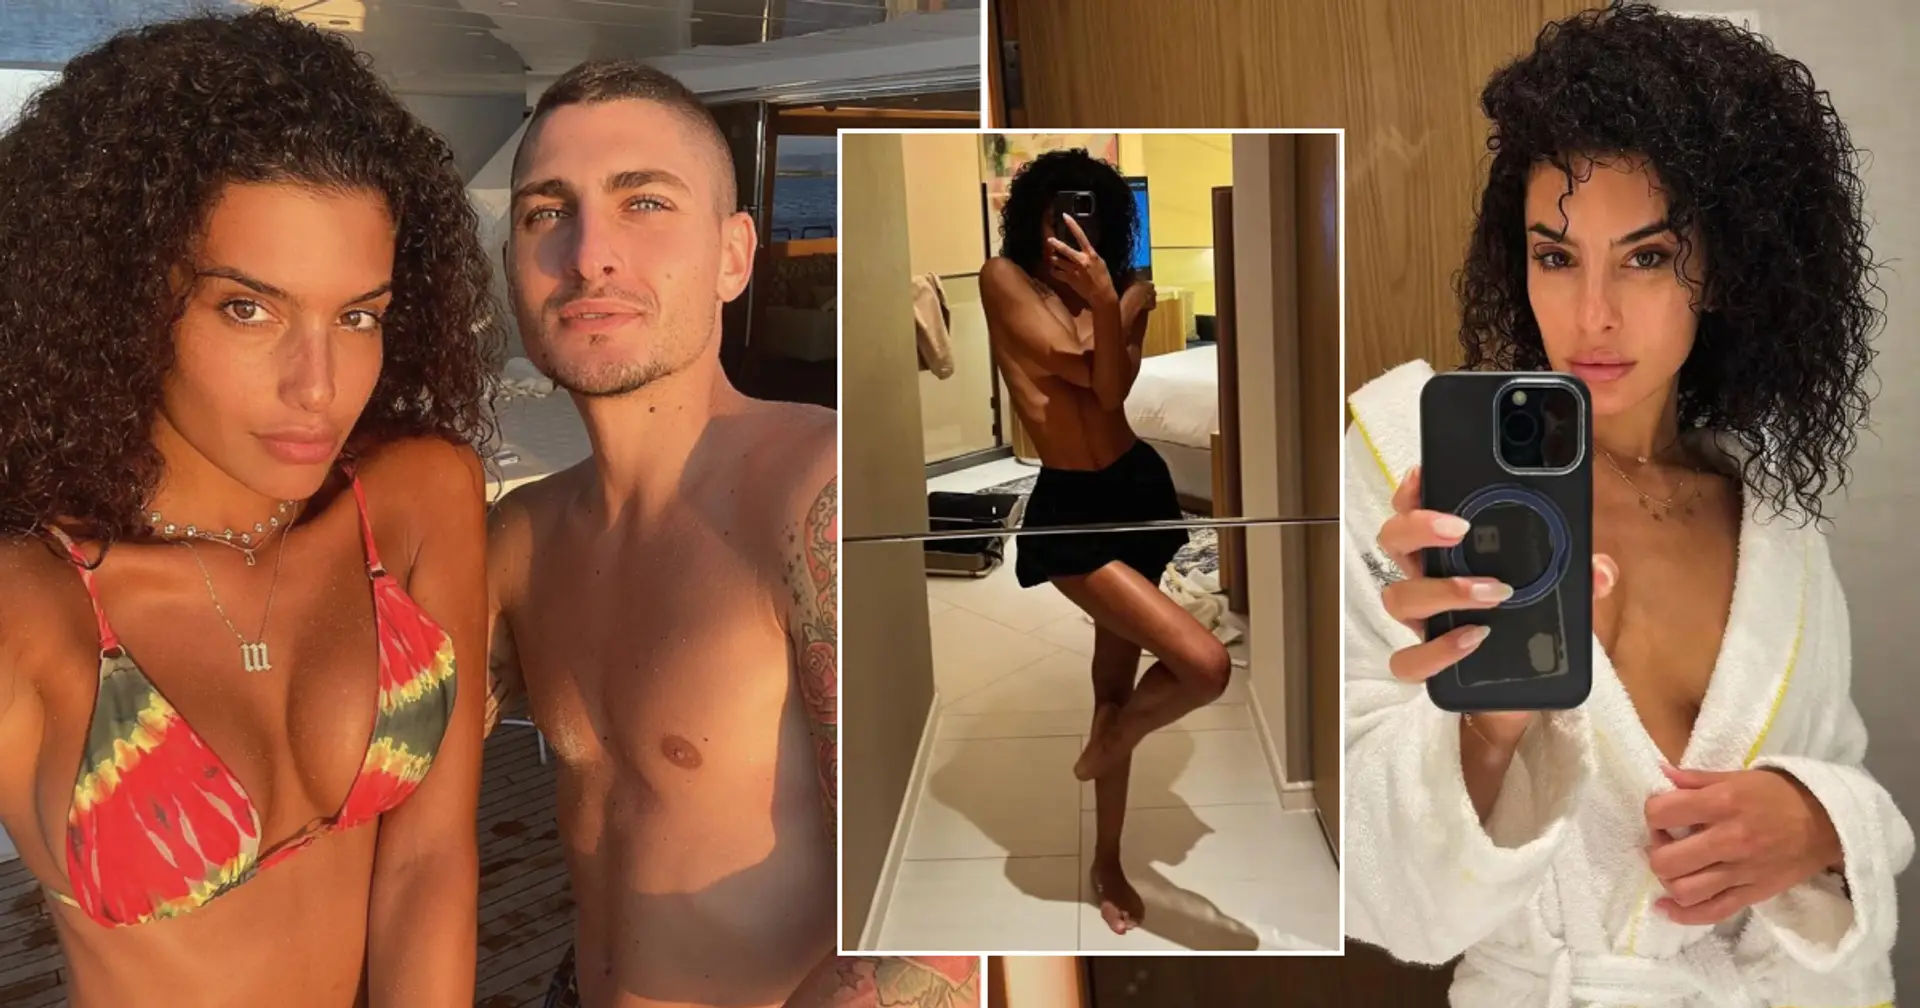 24 hours in Dubai: Marco Veratti's wife enjoys life in the Middle East and posts topless photos on social media